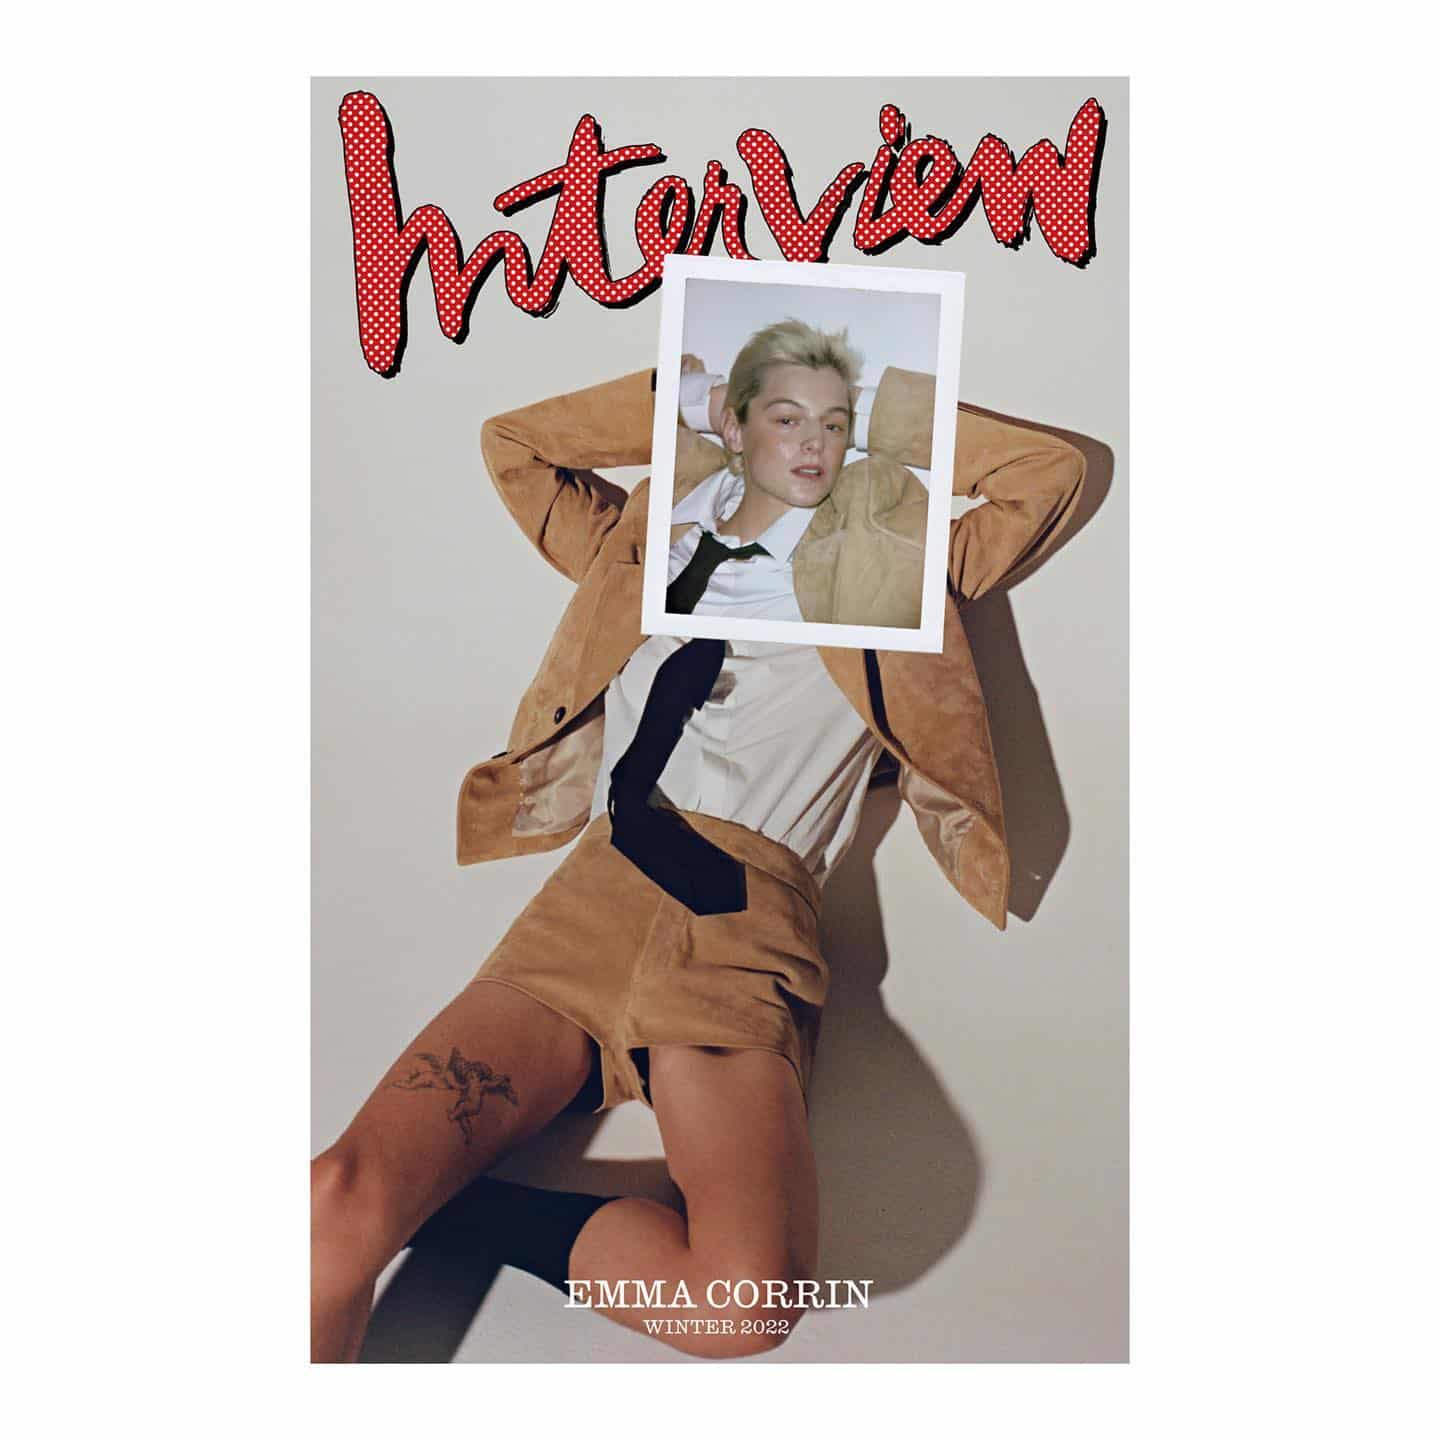 @emmalouisecorrin on the cover of @interviewmag and in-conversation with discussing their film 🍿 streaming on @netflix now 
.
.
.
.
📸 @heather_glazzard 
🩳 @harry_lambert 
️ @danielmartin81 
 @beccawordingham